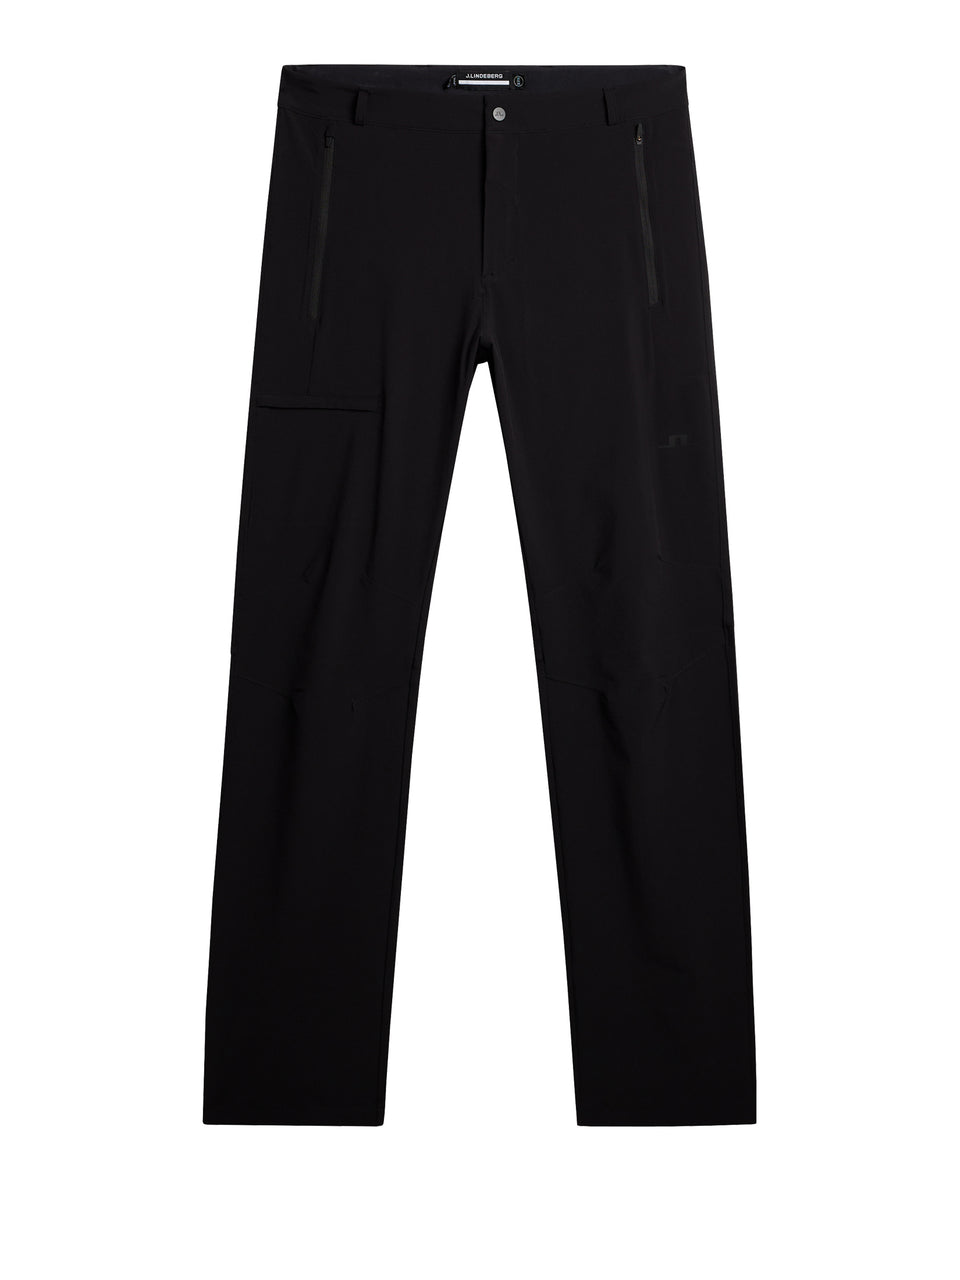 Men's Athleisure: Trousers - J.Lindeberg